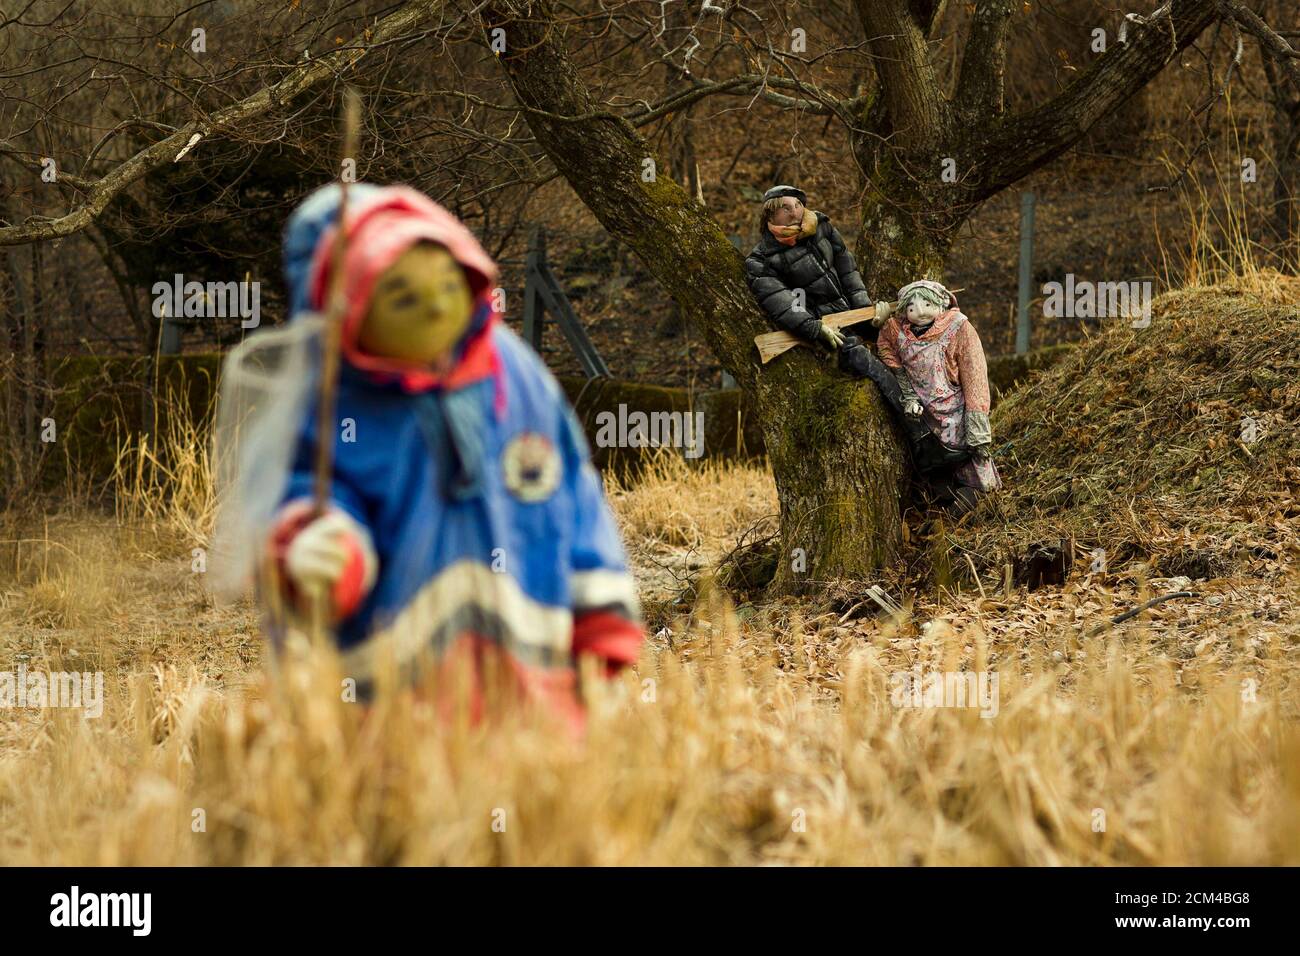 Scarecrows stand in a field in the mountain village of Nagoro on Shikoku Island in southern Japan February 24, 2015. Tsukimi Ayano made her first scarecrow 13 years ago to frighten off birds pecking at seeds in her garden. The life-sized straw doll resembled her father, so she made more. Today, the tiny village of Nagoro in southern Japan is teeming with Ayano's hand-sewn creations, frozen in time for a tableau that captures the motions of everyday life. Nagoro, like many villages in Japan's countryside, has been hit hard by inhabitants flocking to cities for work and leaving mostly pensioners Stock Photo